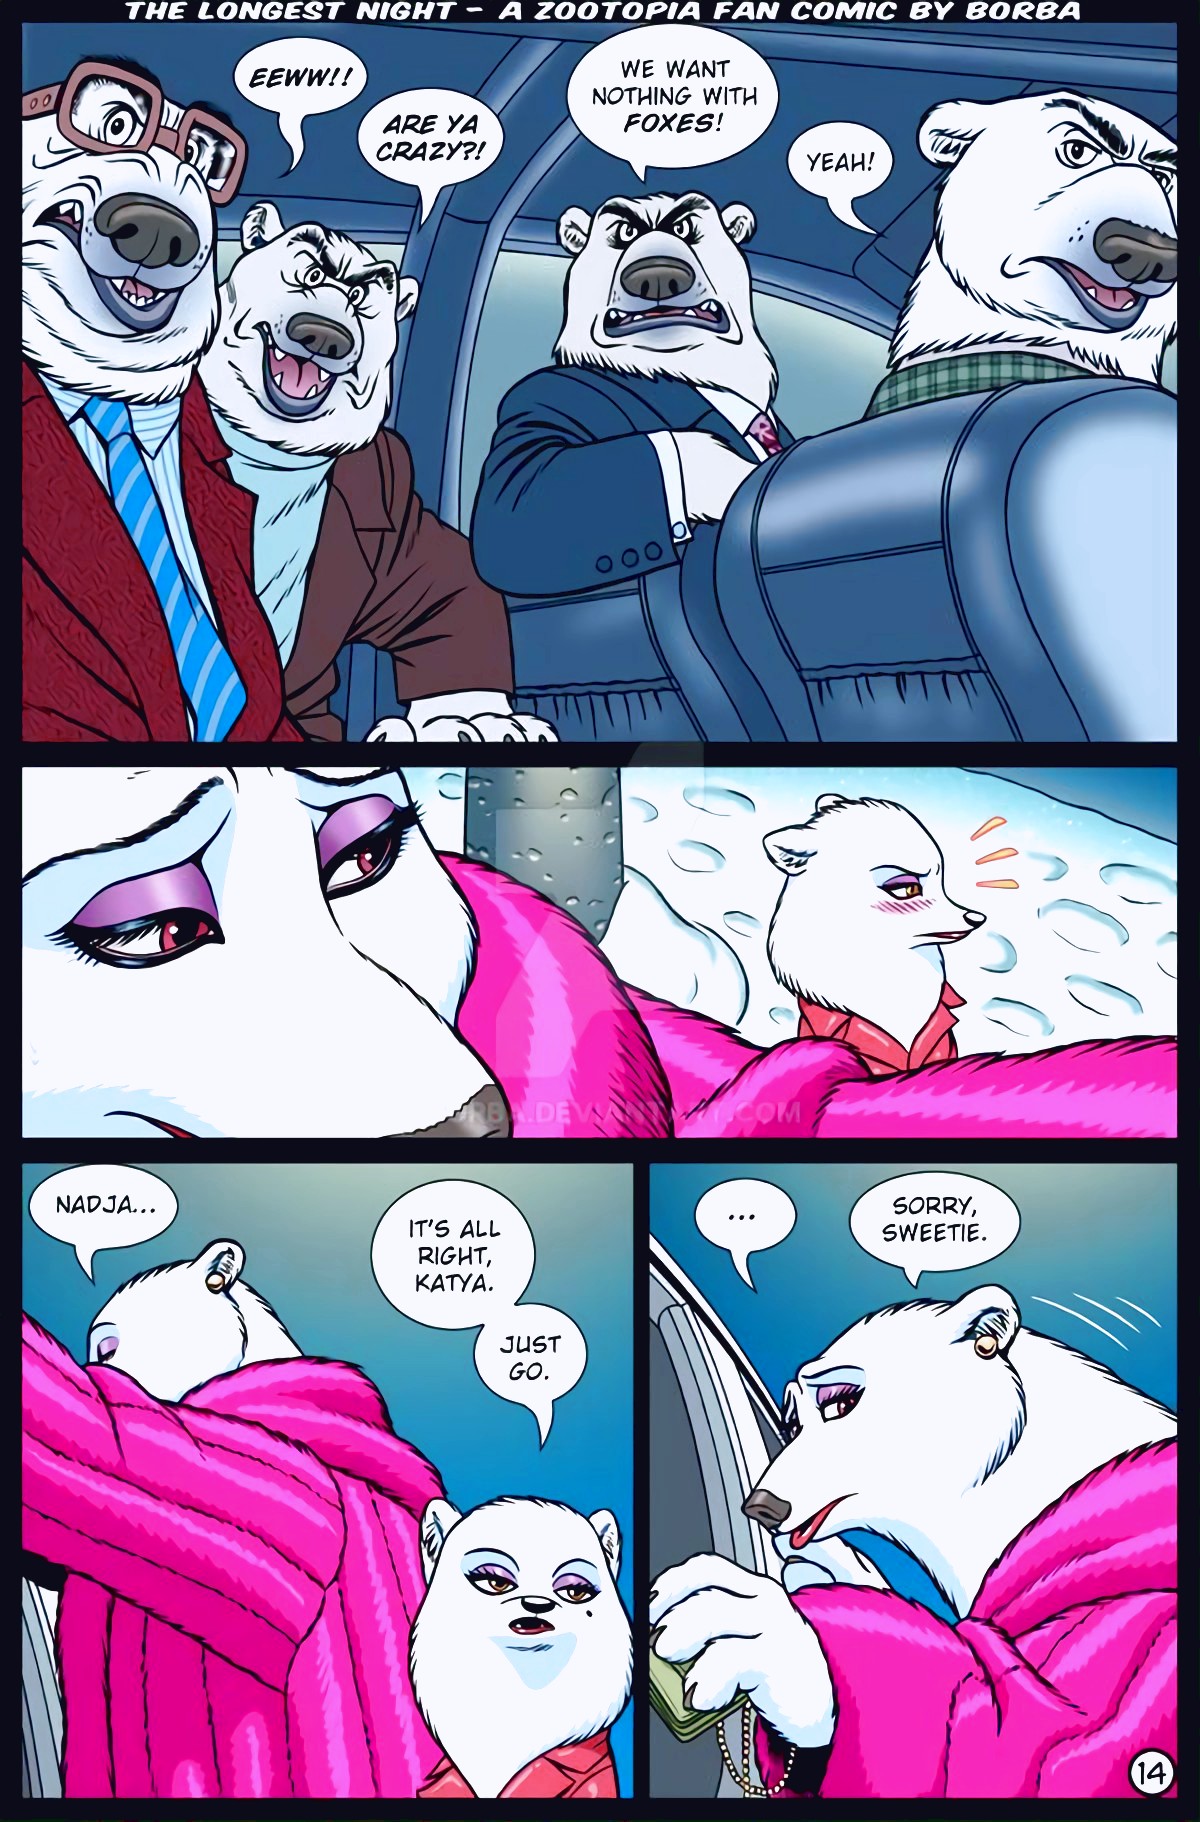 The Longest Night page 14